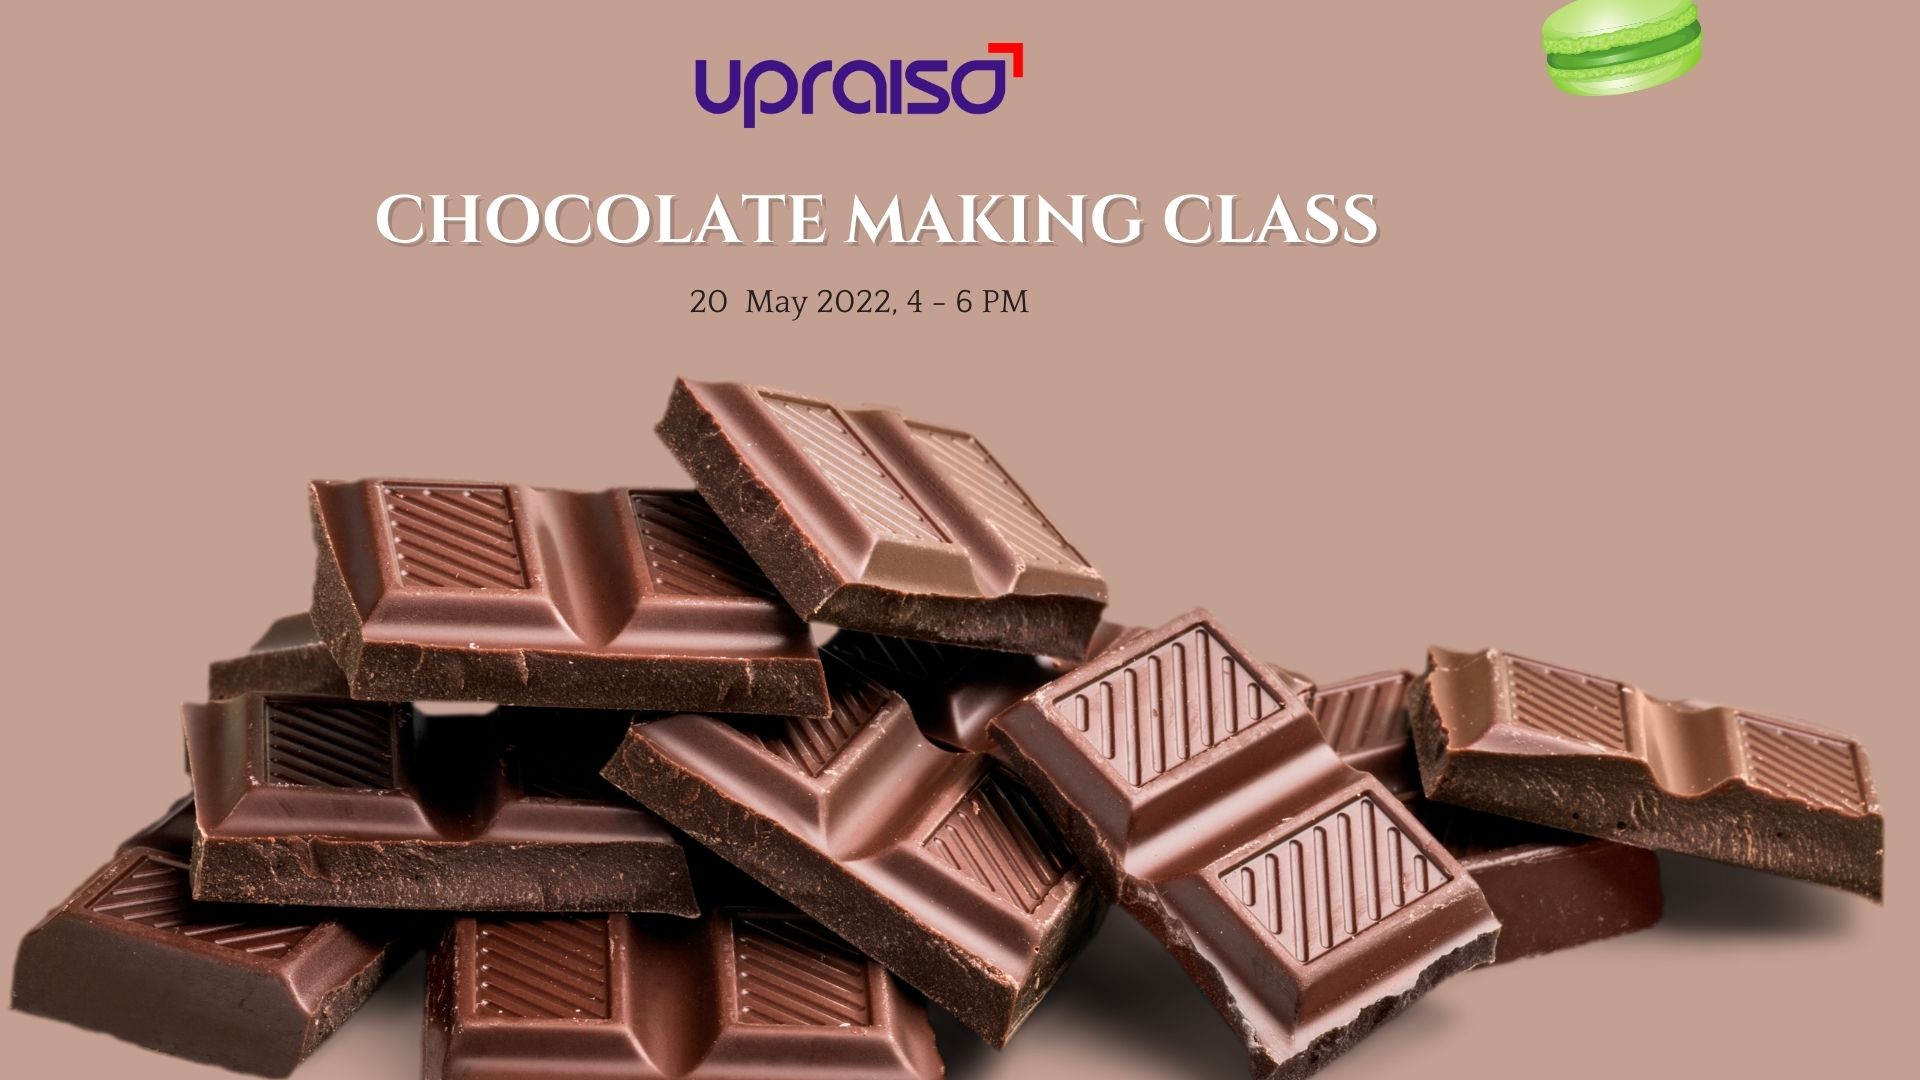 Chocolate making class for beginners